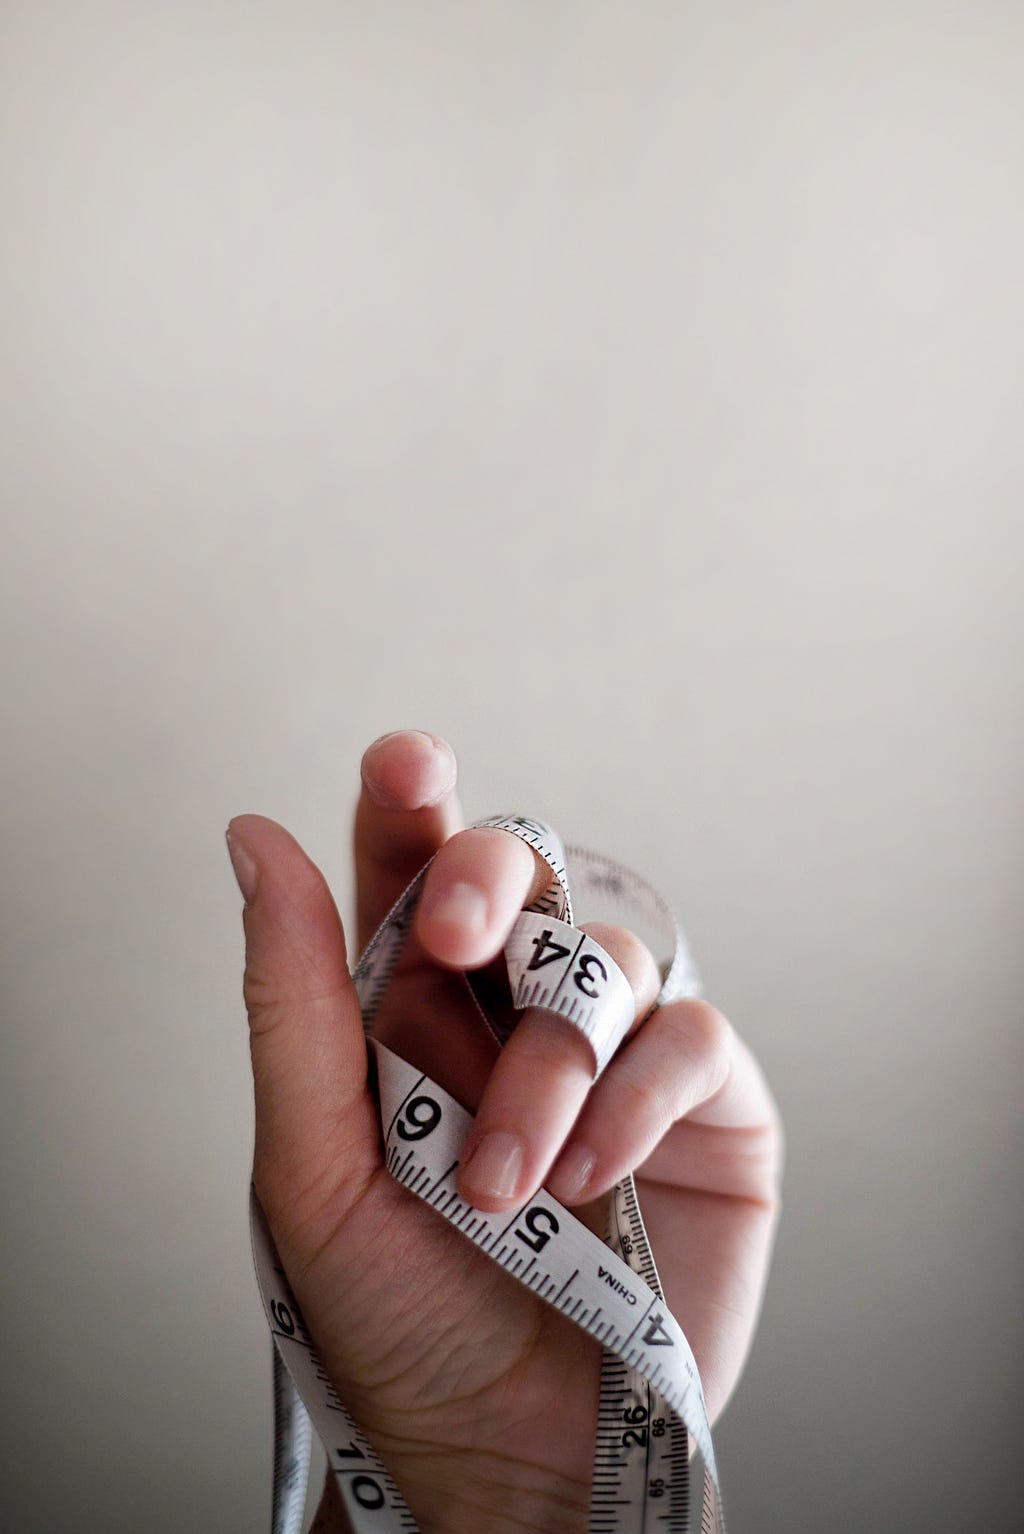 A hand with a measuring tape